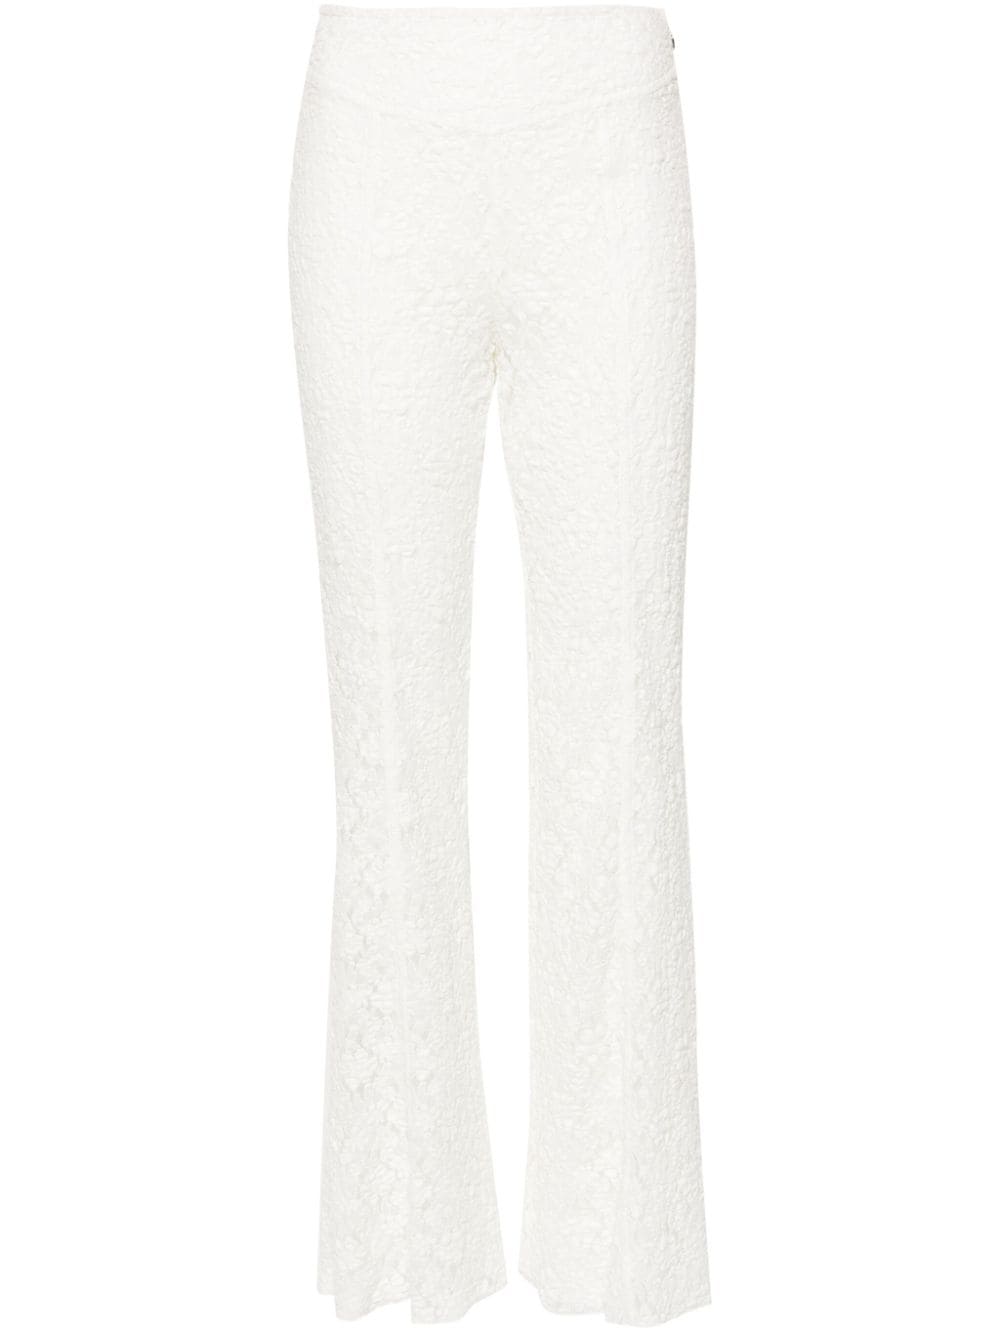 Rotate Birger Christensen Floral-lace Flared Trousers In White